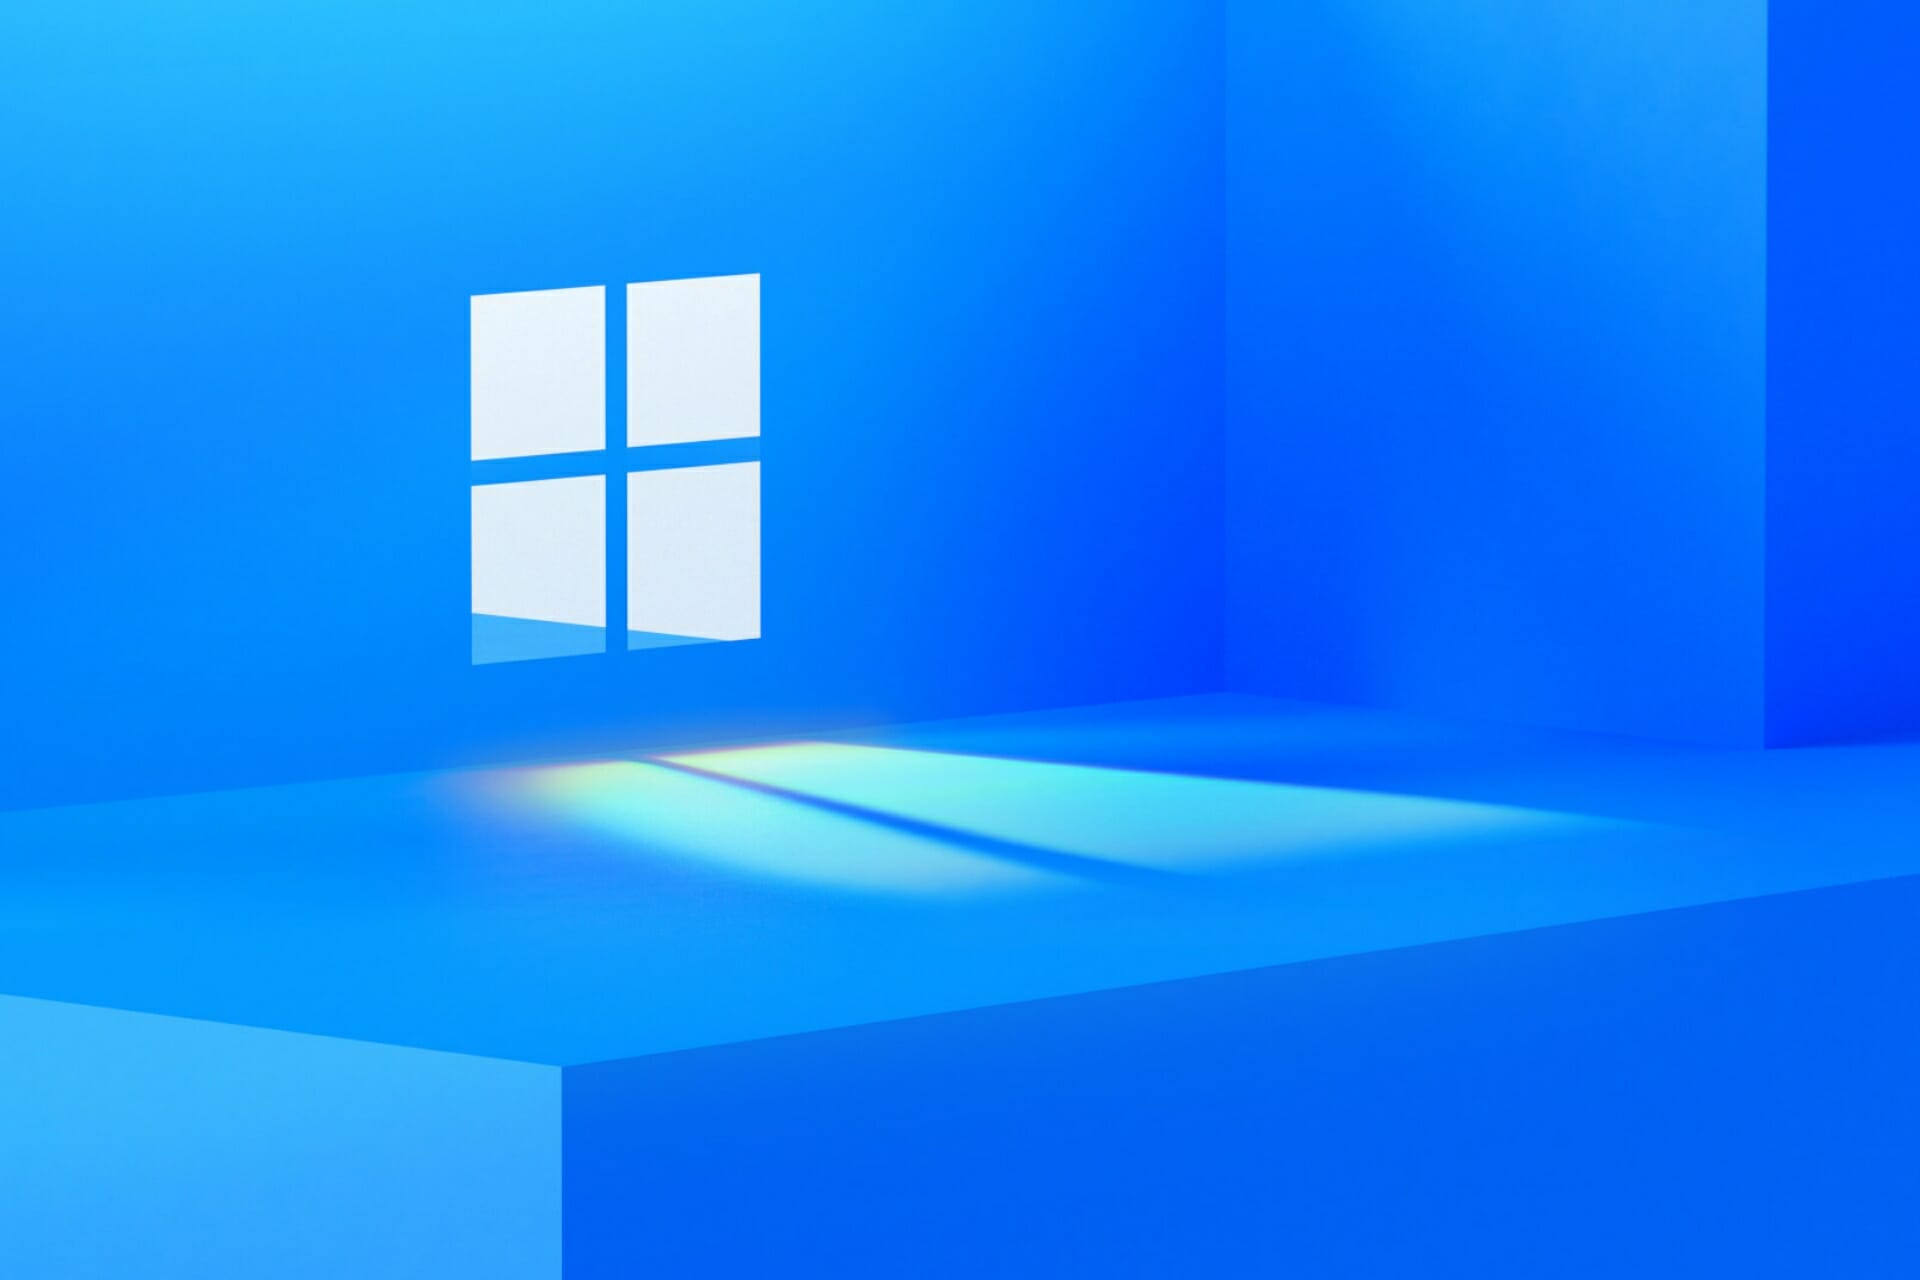 How To The Windows Wallpaper